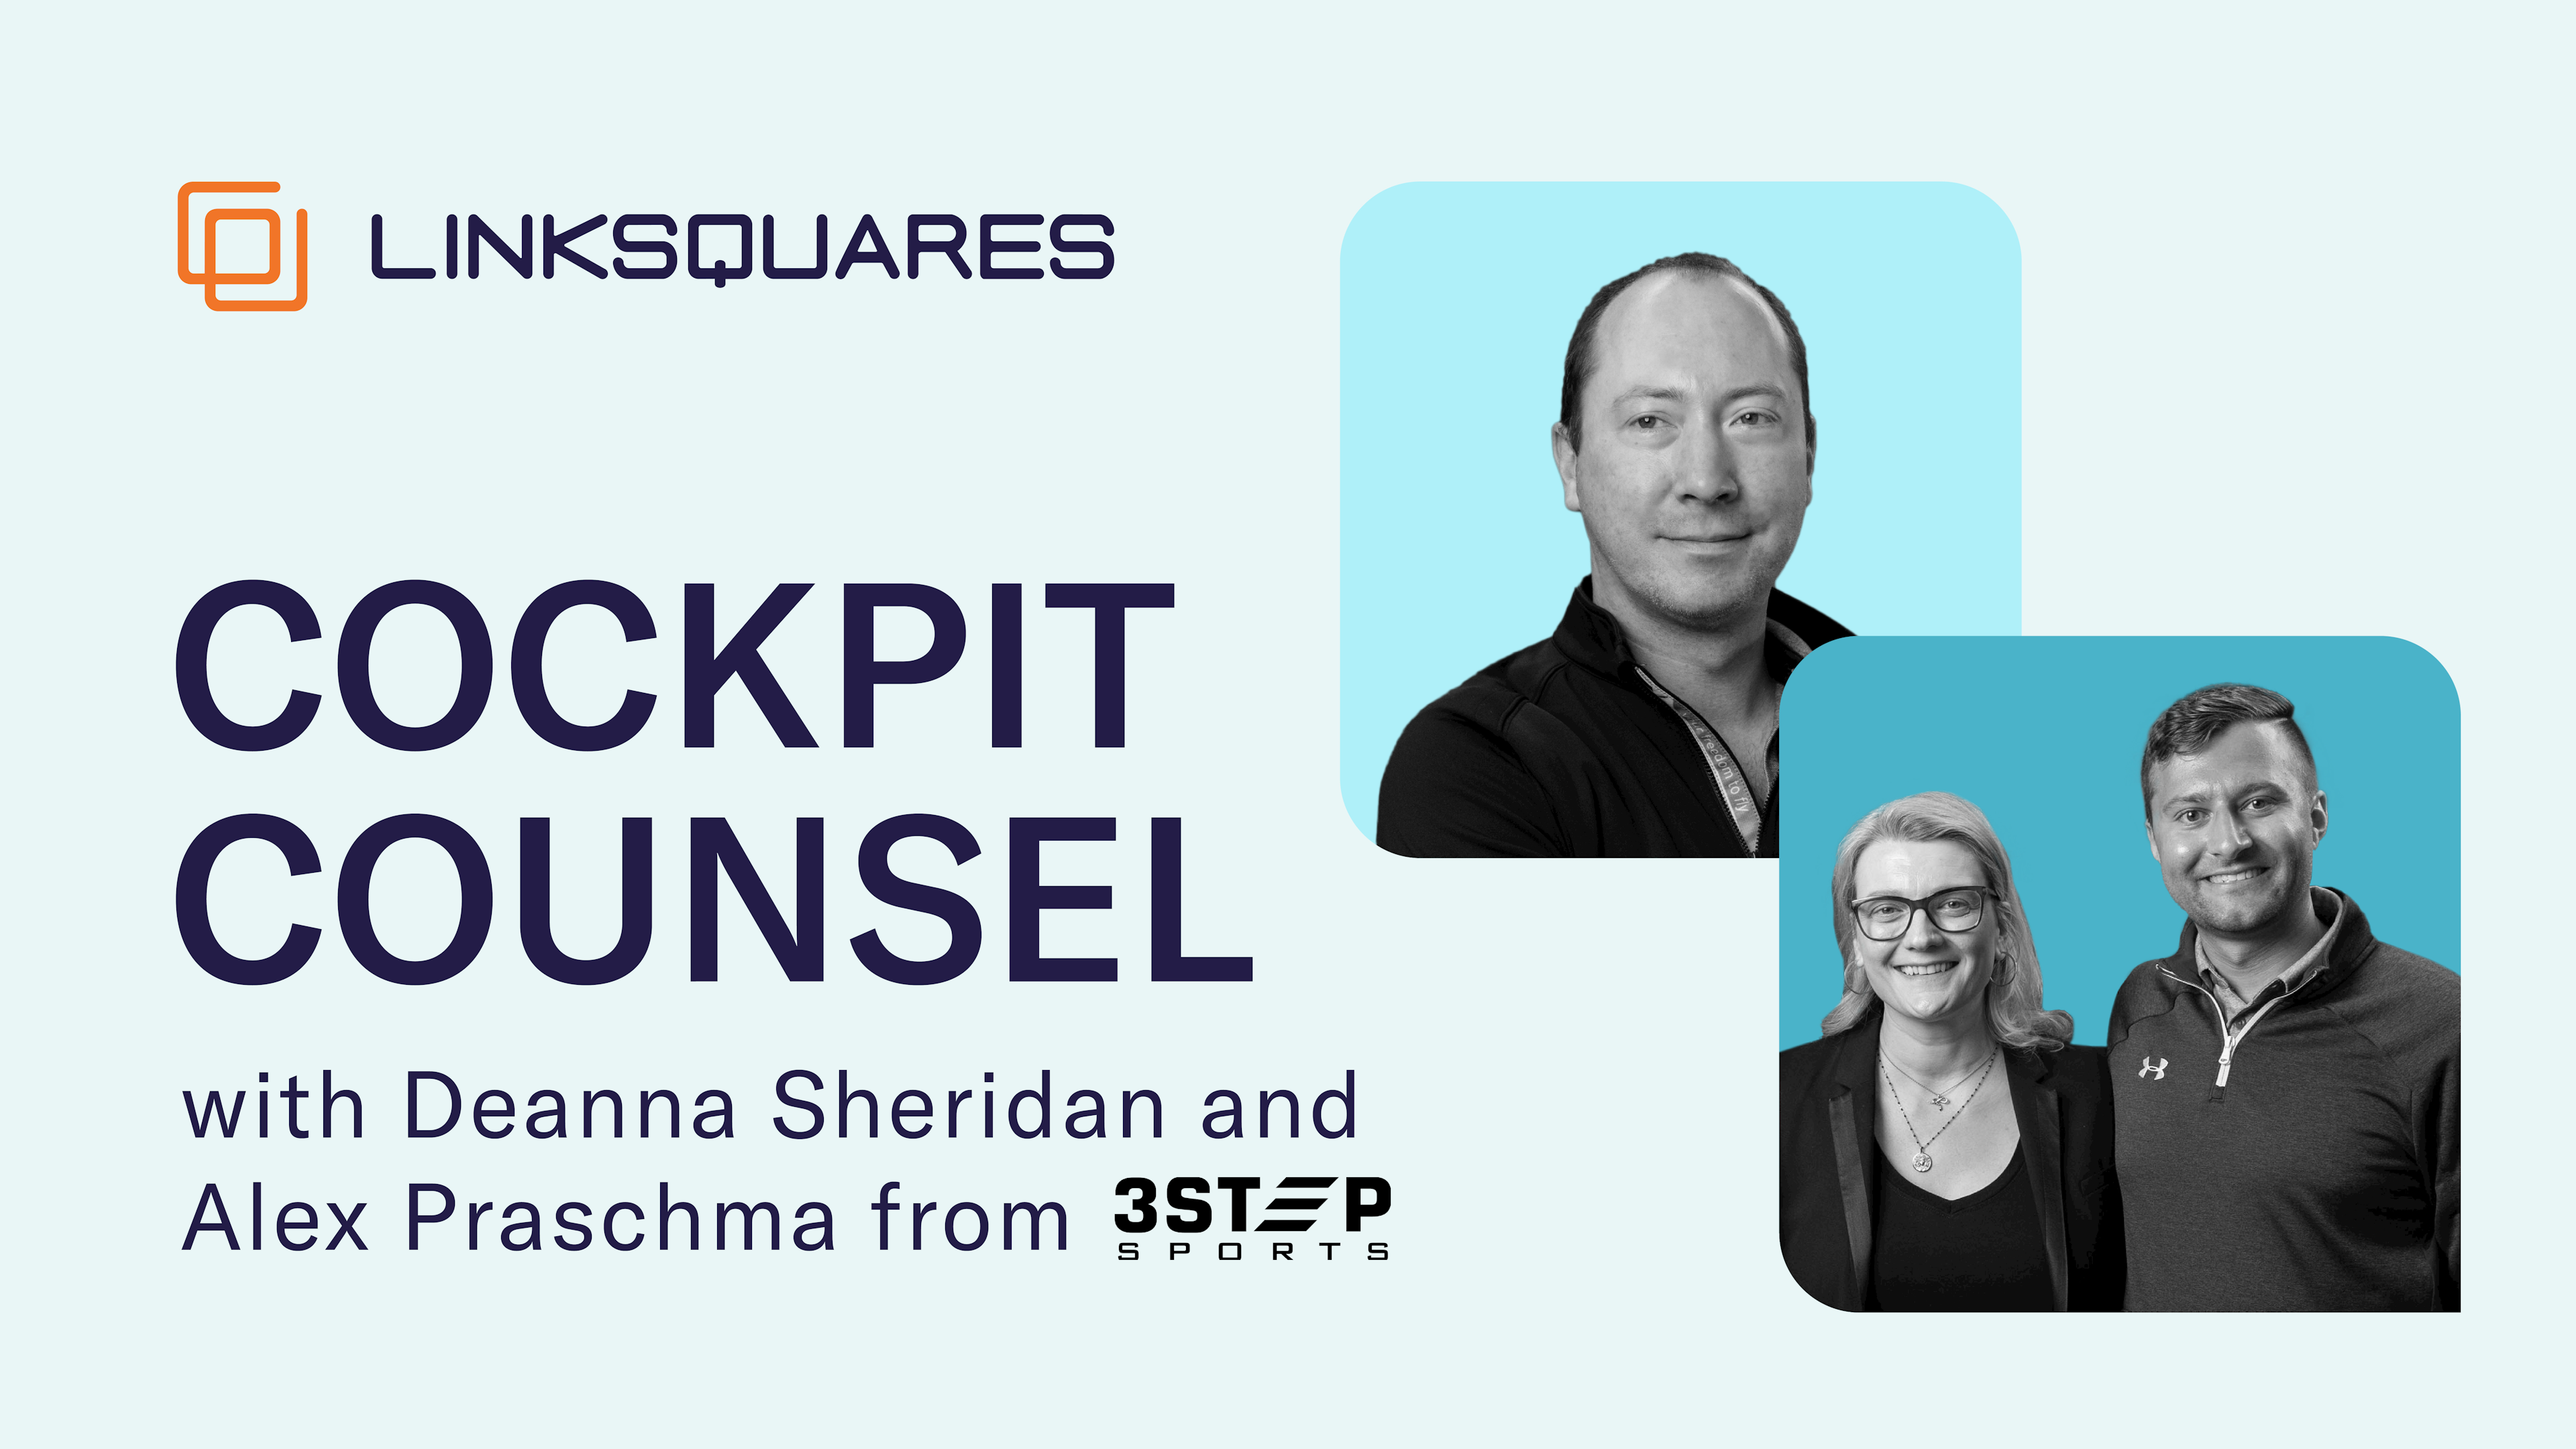 Cockpit Counsel: Running an Effective Legal Team with 3STEP Sports